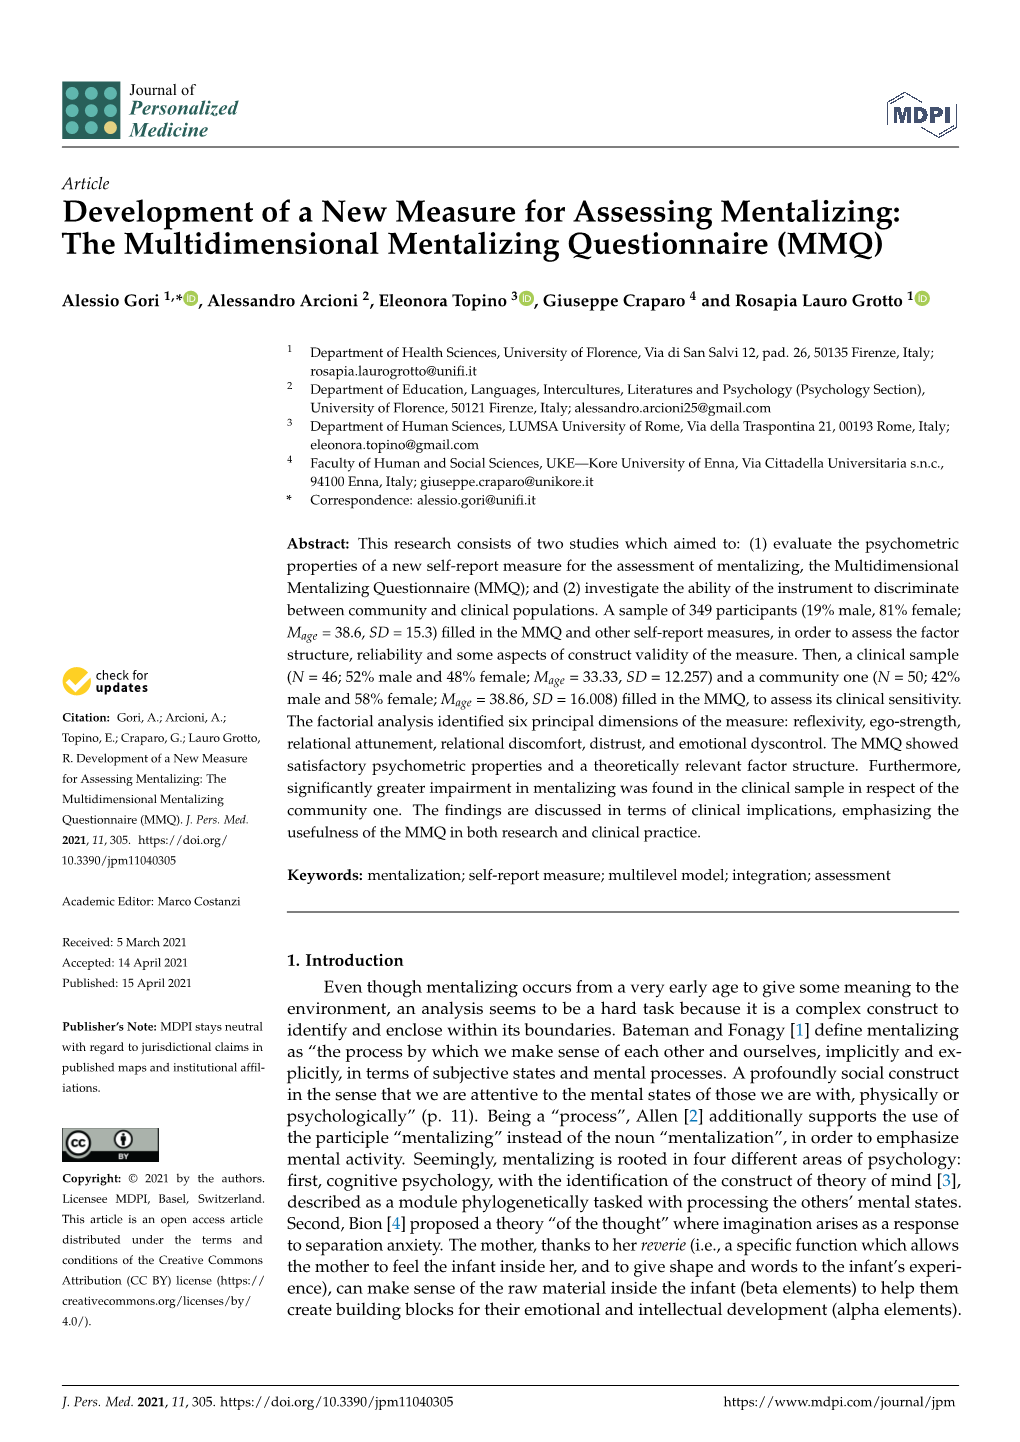 Development of a New Measure for Assessing Mentalizing: the Multidimensional Mentalizing Questionnaire (MMQ)